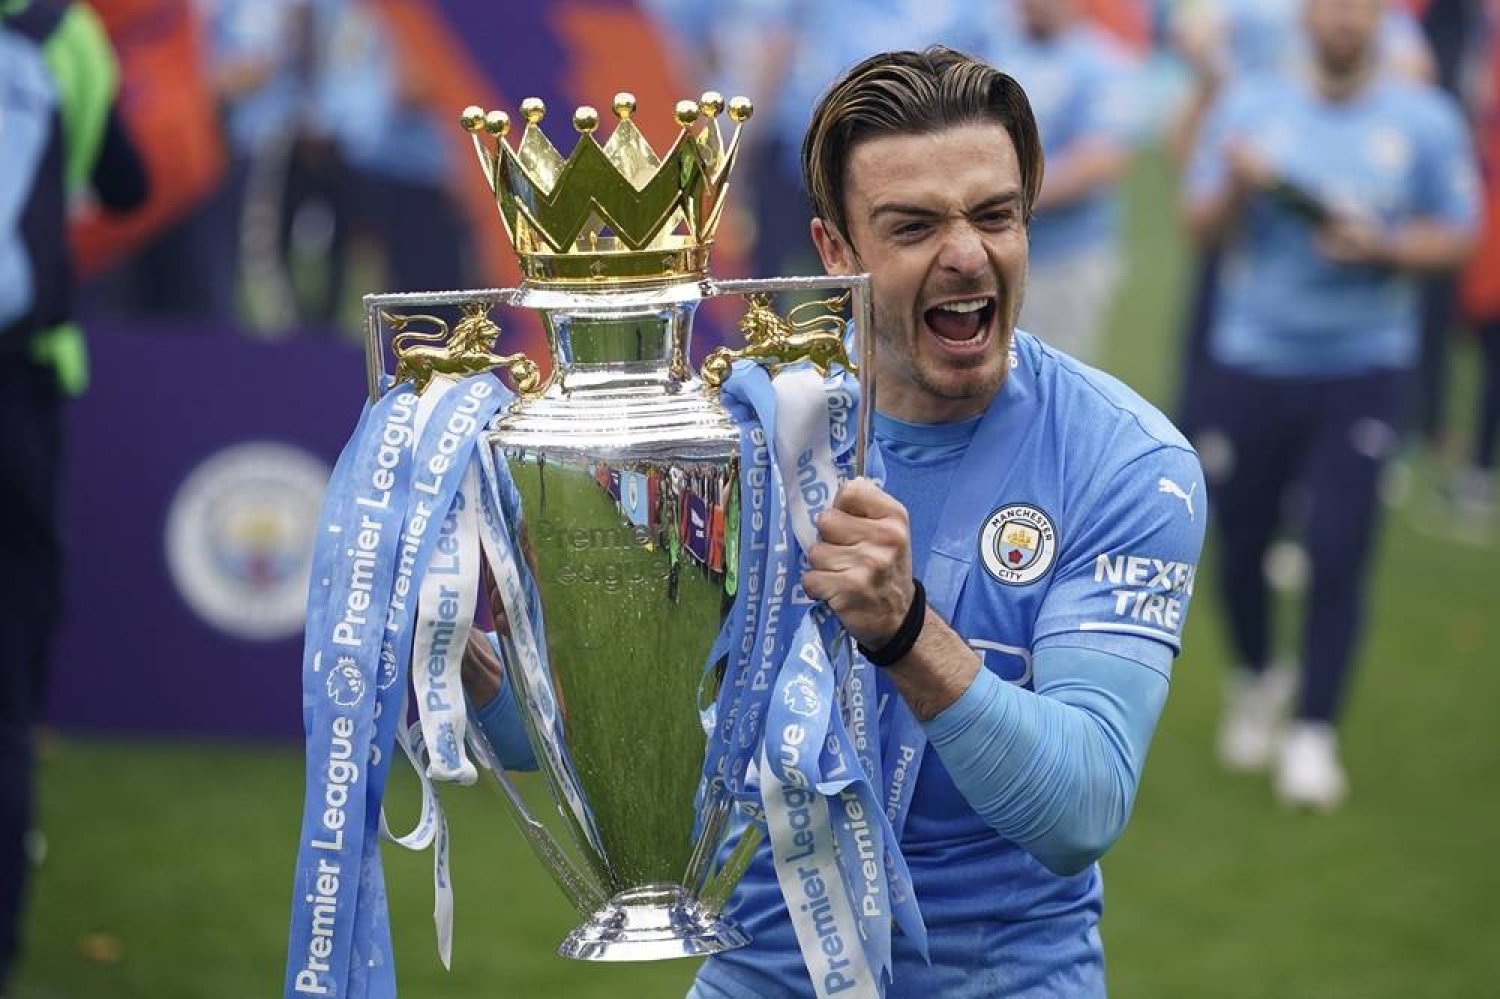 Manchester City's Jack Grealish celebrates with the trophy after winning the 2022 English Premier League title at the Etihad Stadium in Manchester, England, Sunday, May 22, 2022. (AP)